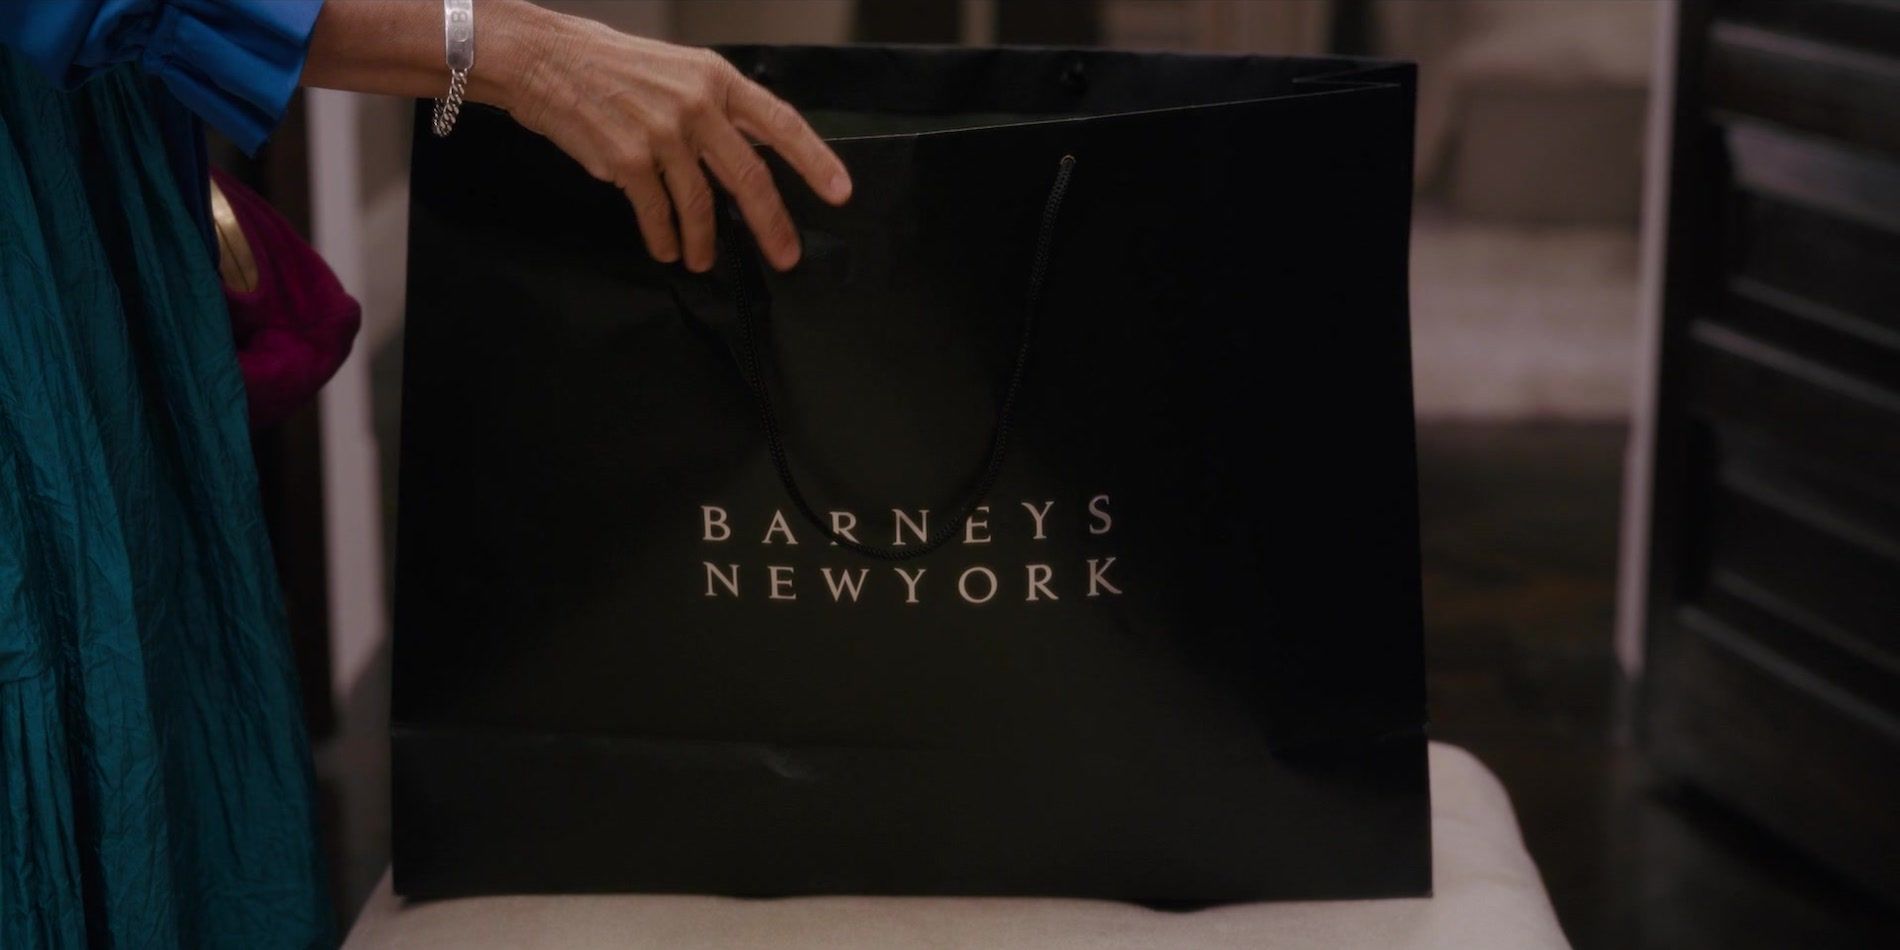 Barneys Shopping Bag in And Just Like That